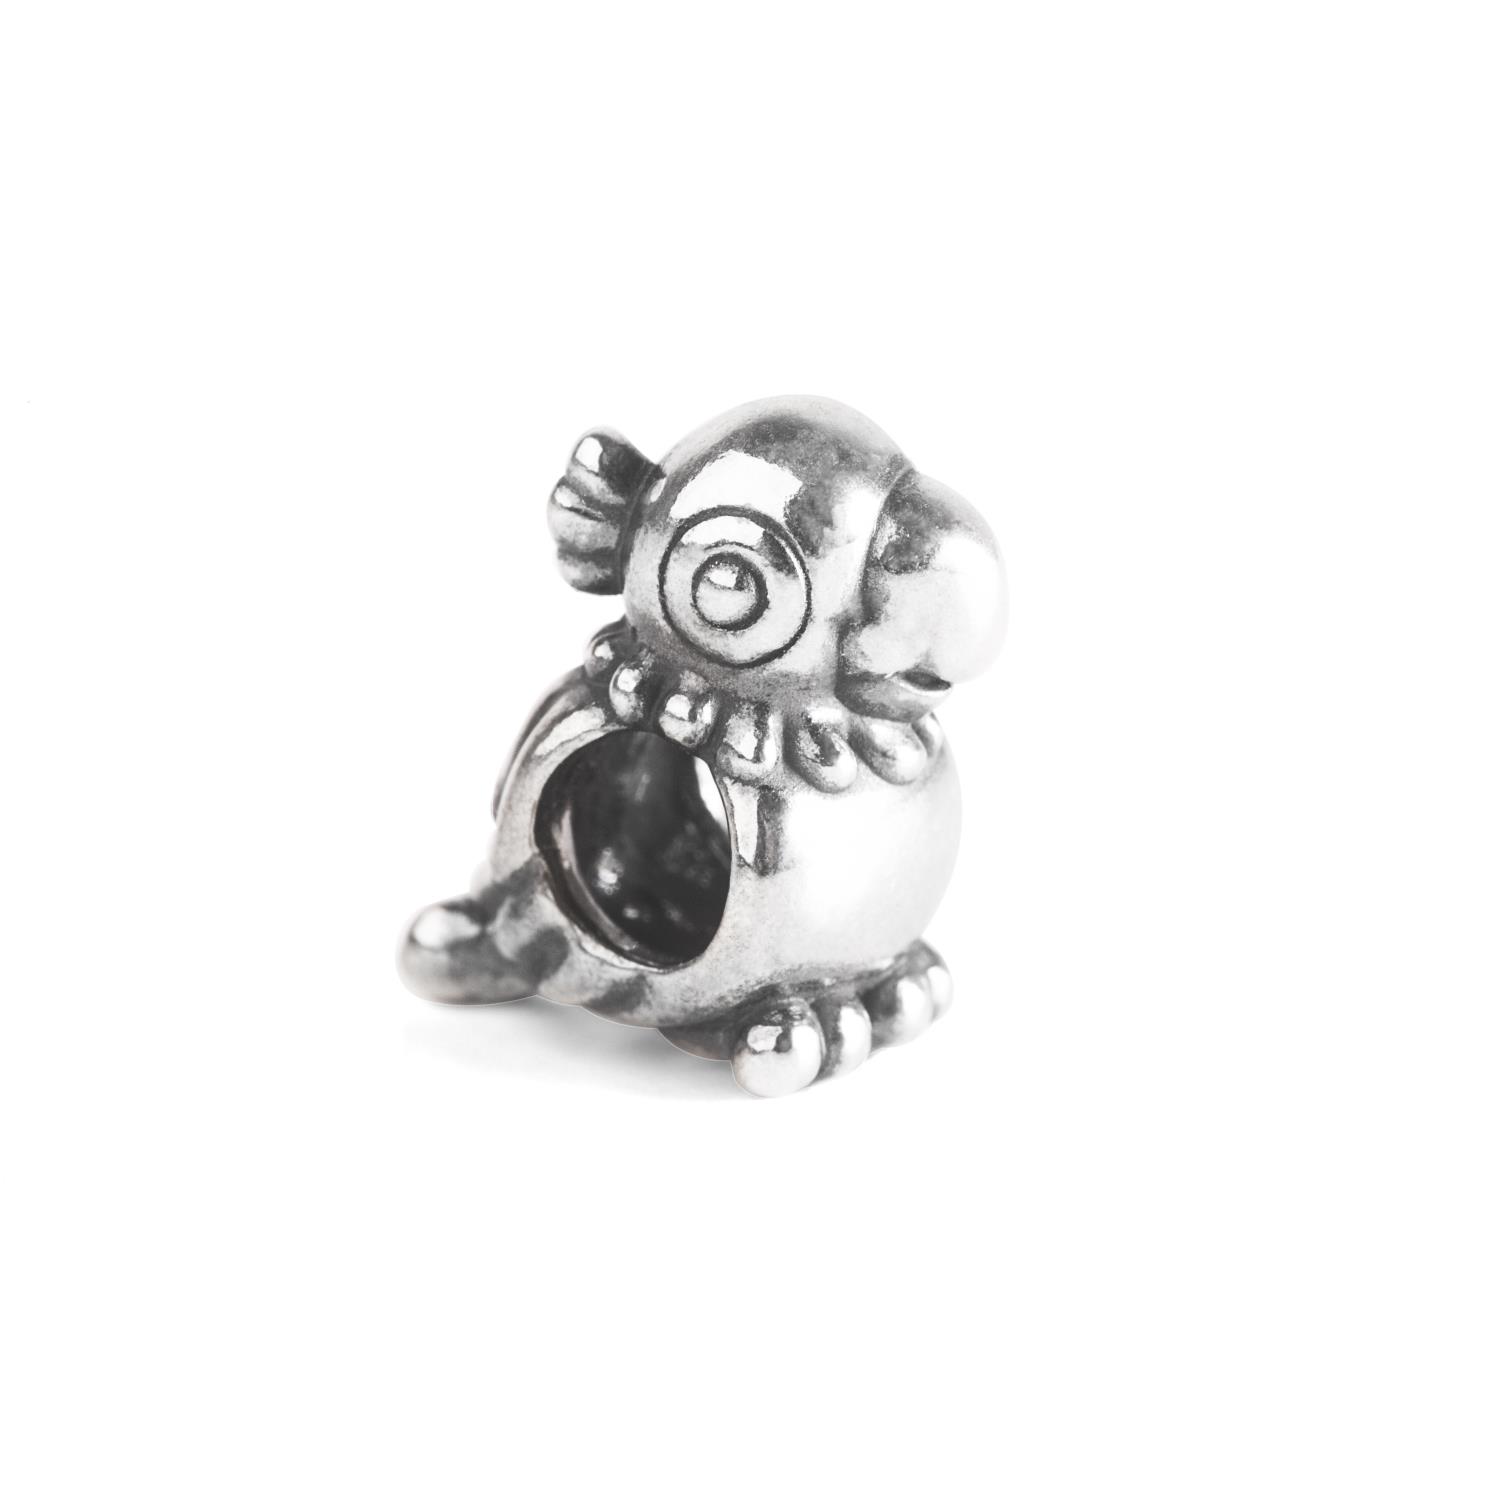 Thun By Trollbeads - Bead in Argento Pappagallo Tropicale Ref. TAGBE-30165 - TROLLBEADS